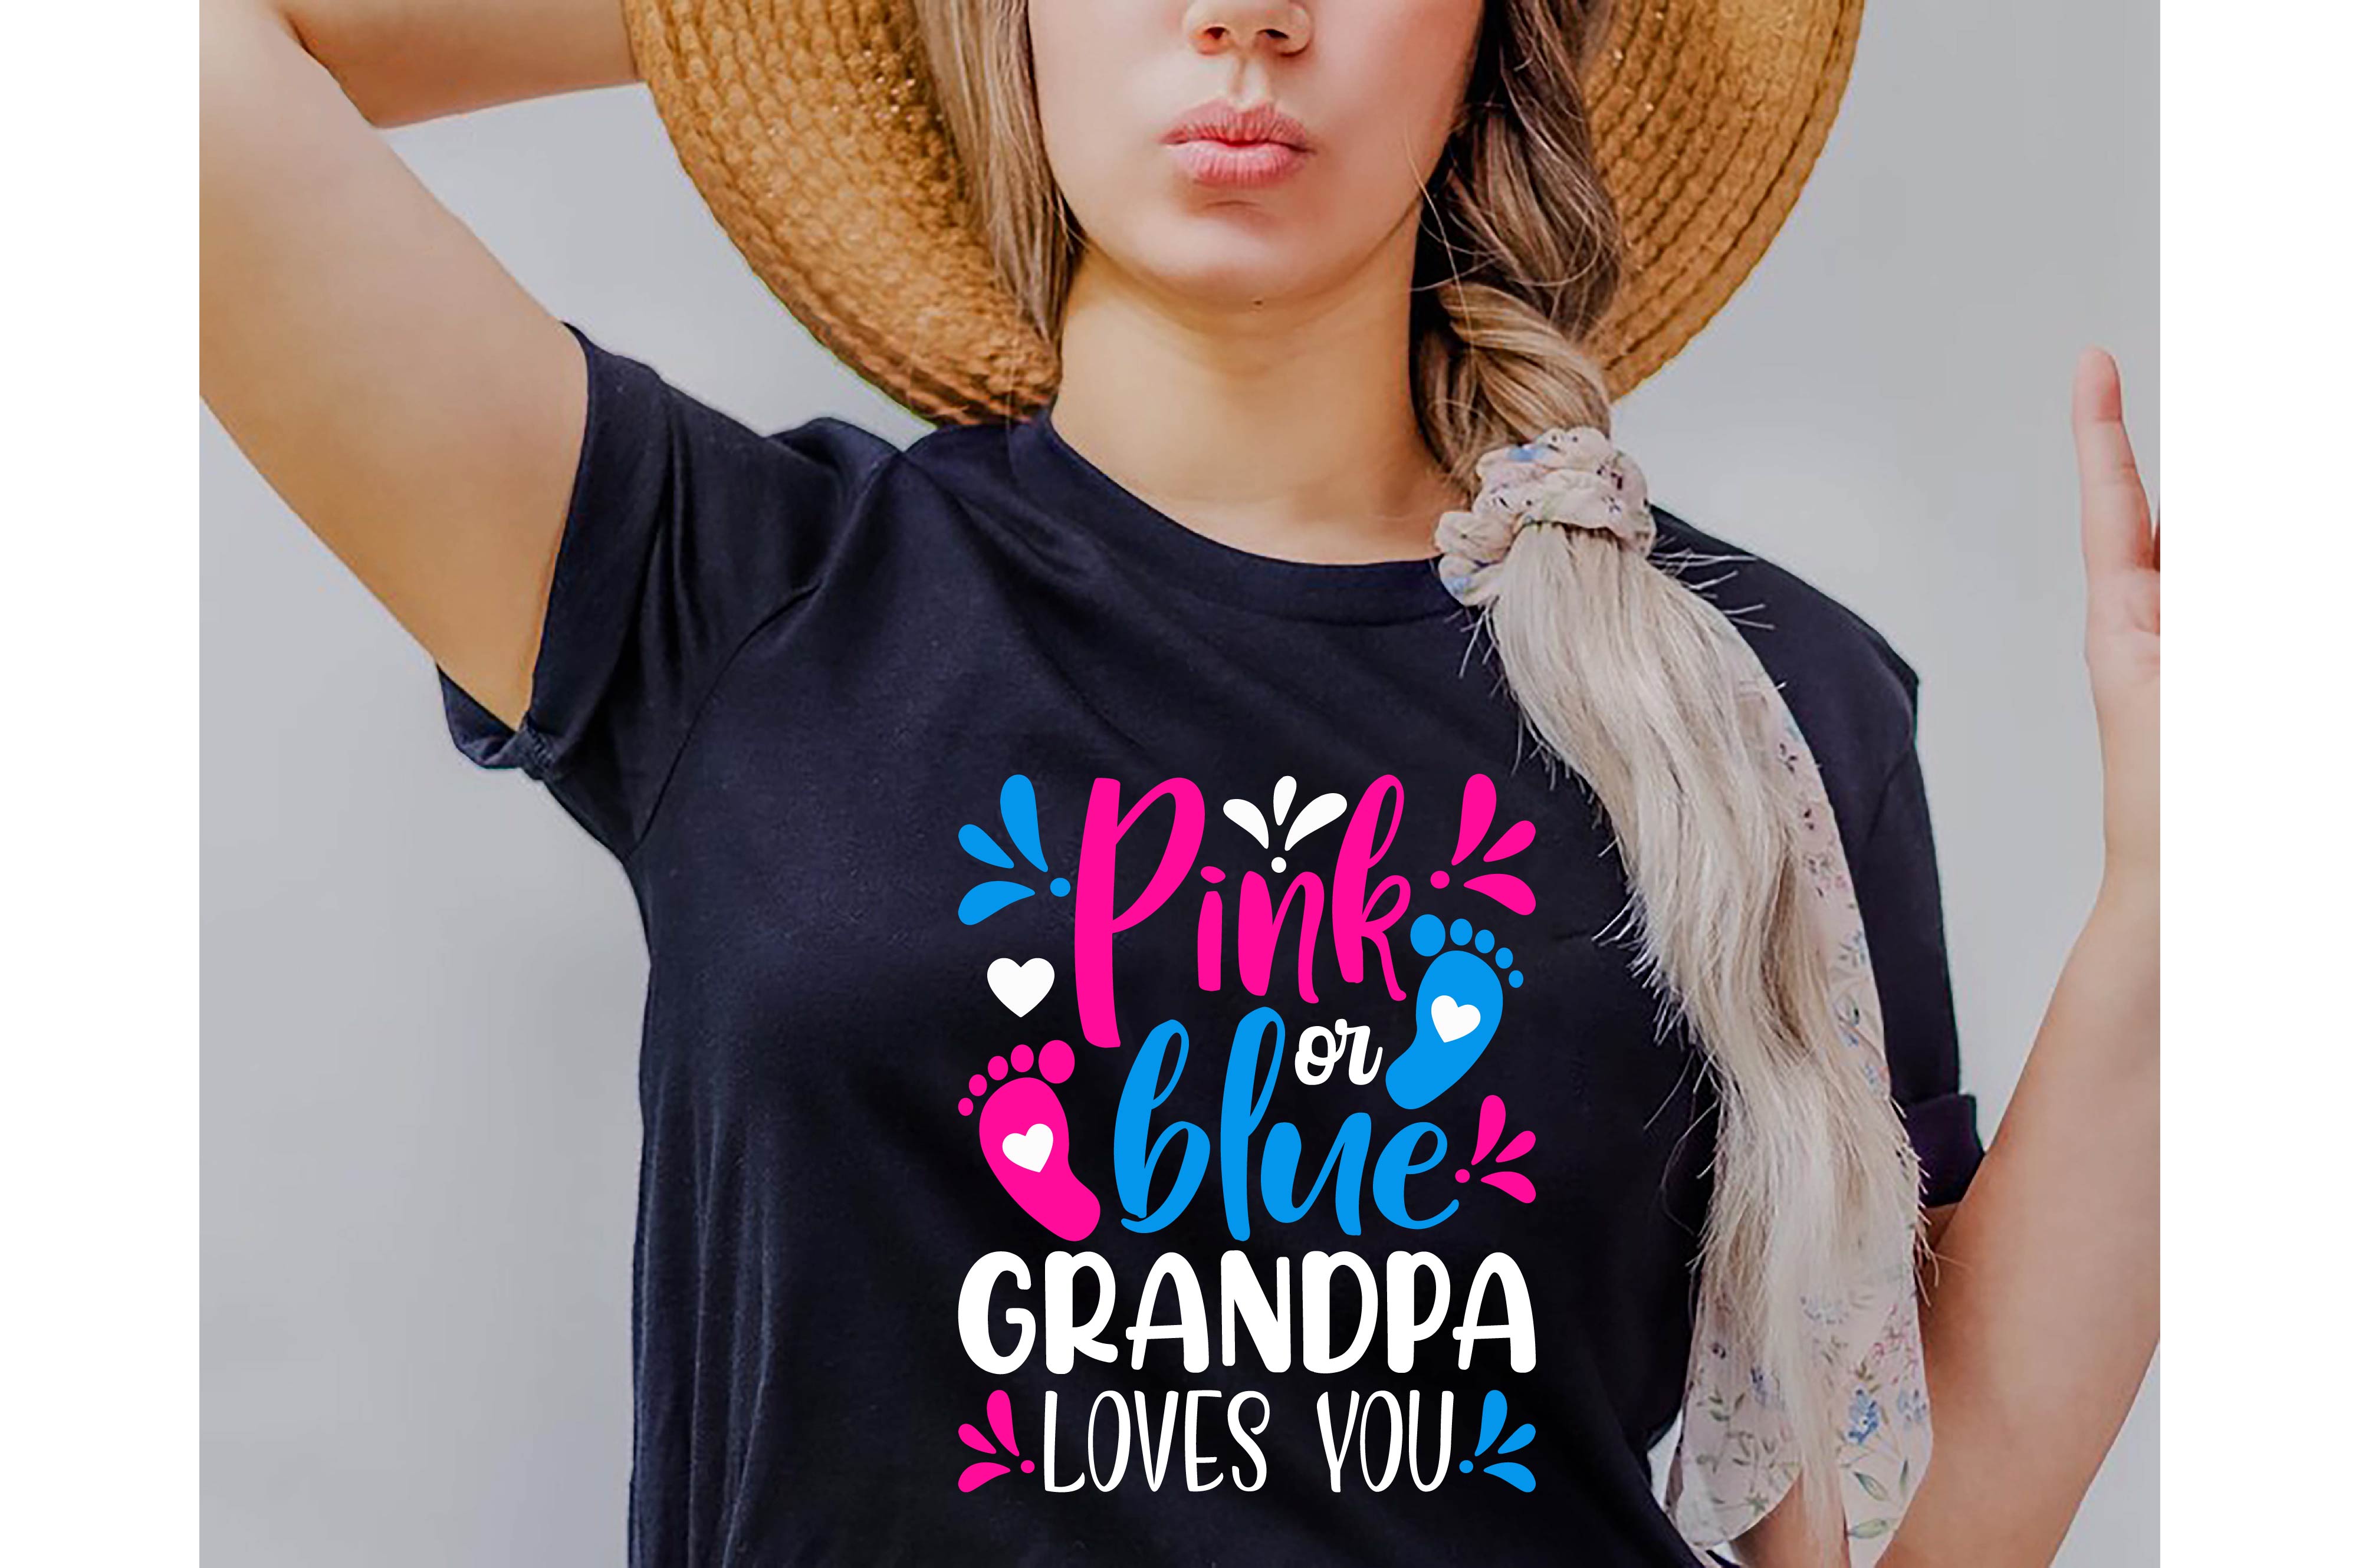 Woman wearing a black shirt that says pink is the new blue grandpa loves you.